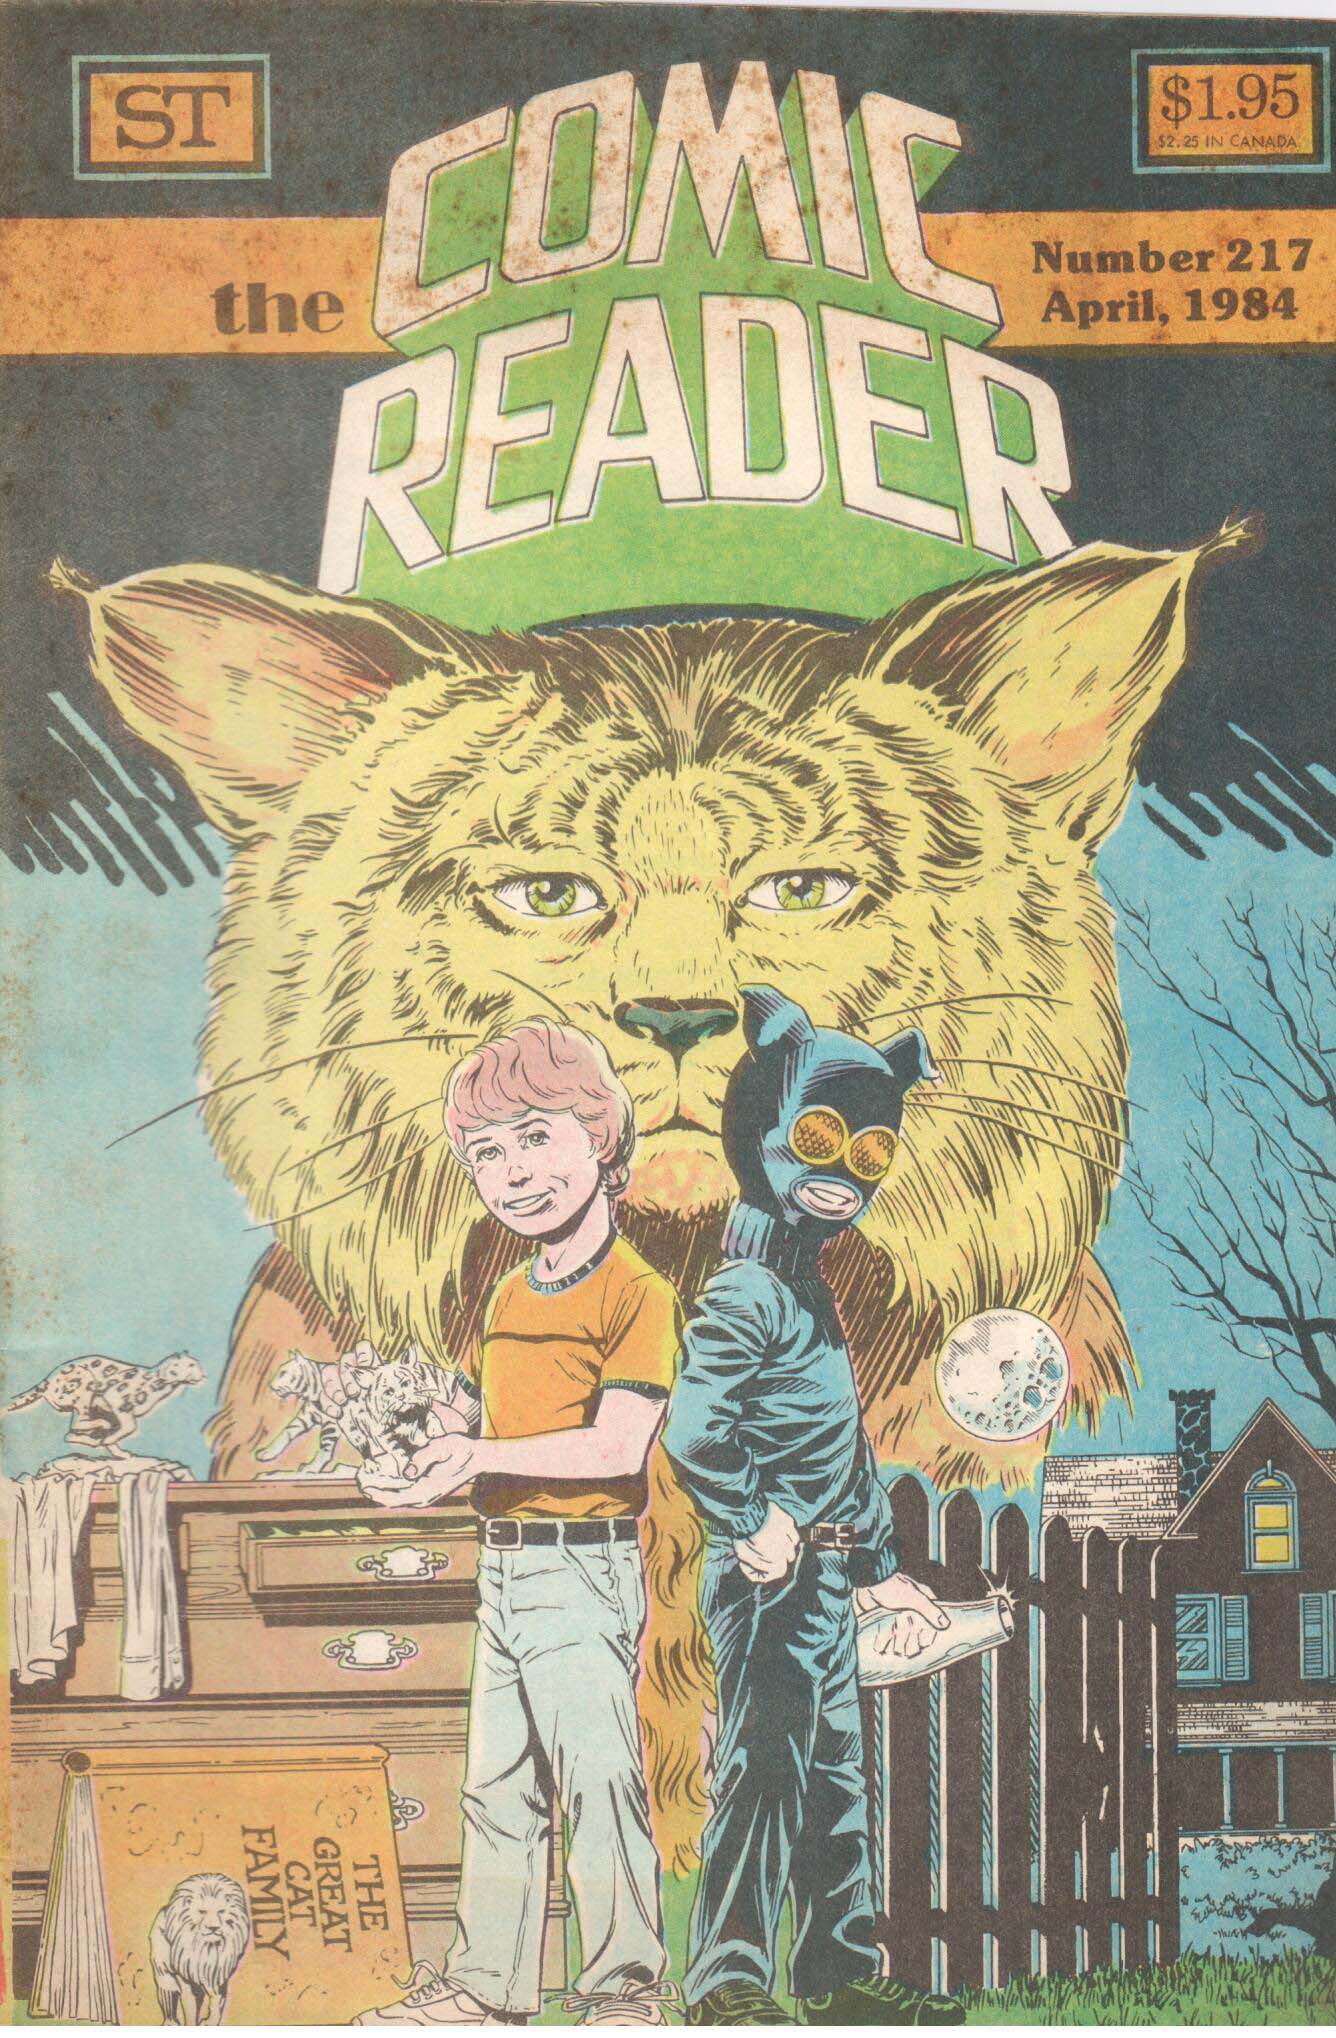 The Comic Reader (1961) #217